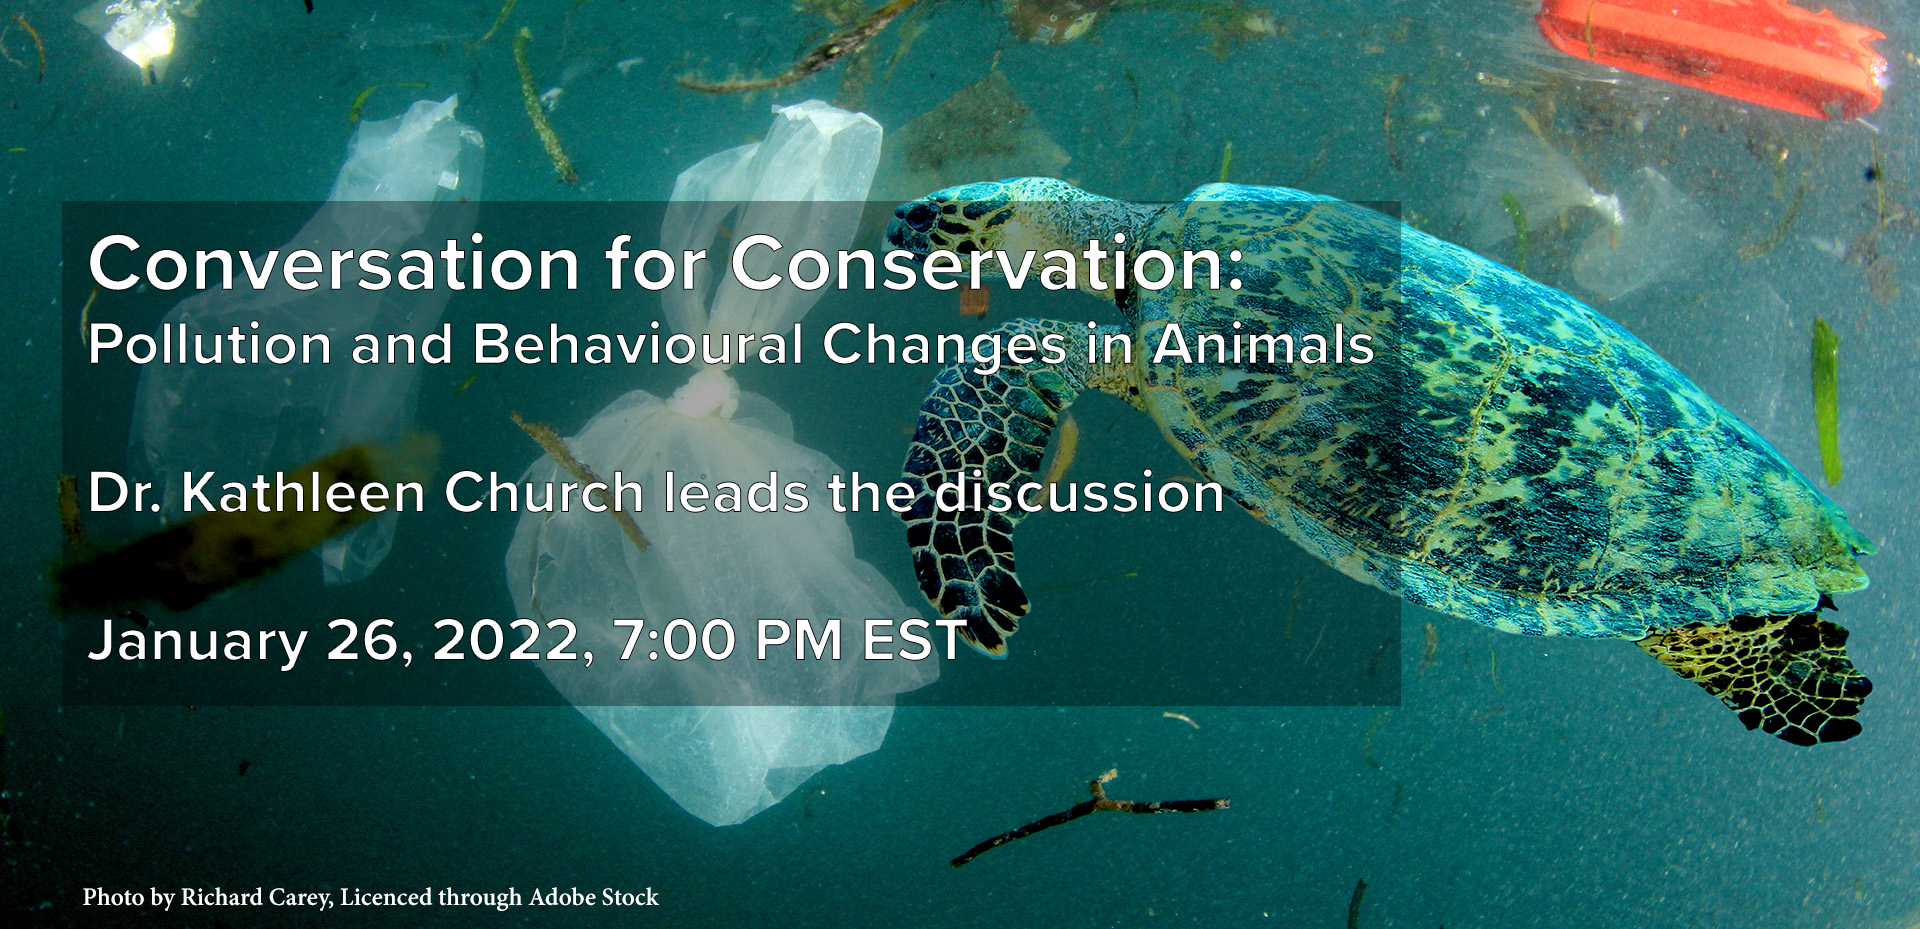 Conversation for Conservation: Pollution and Behavioural Changes in Animals, Jan 26, 7pm